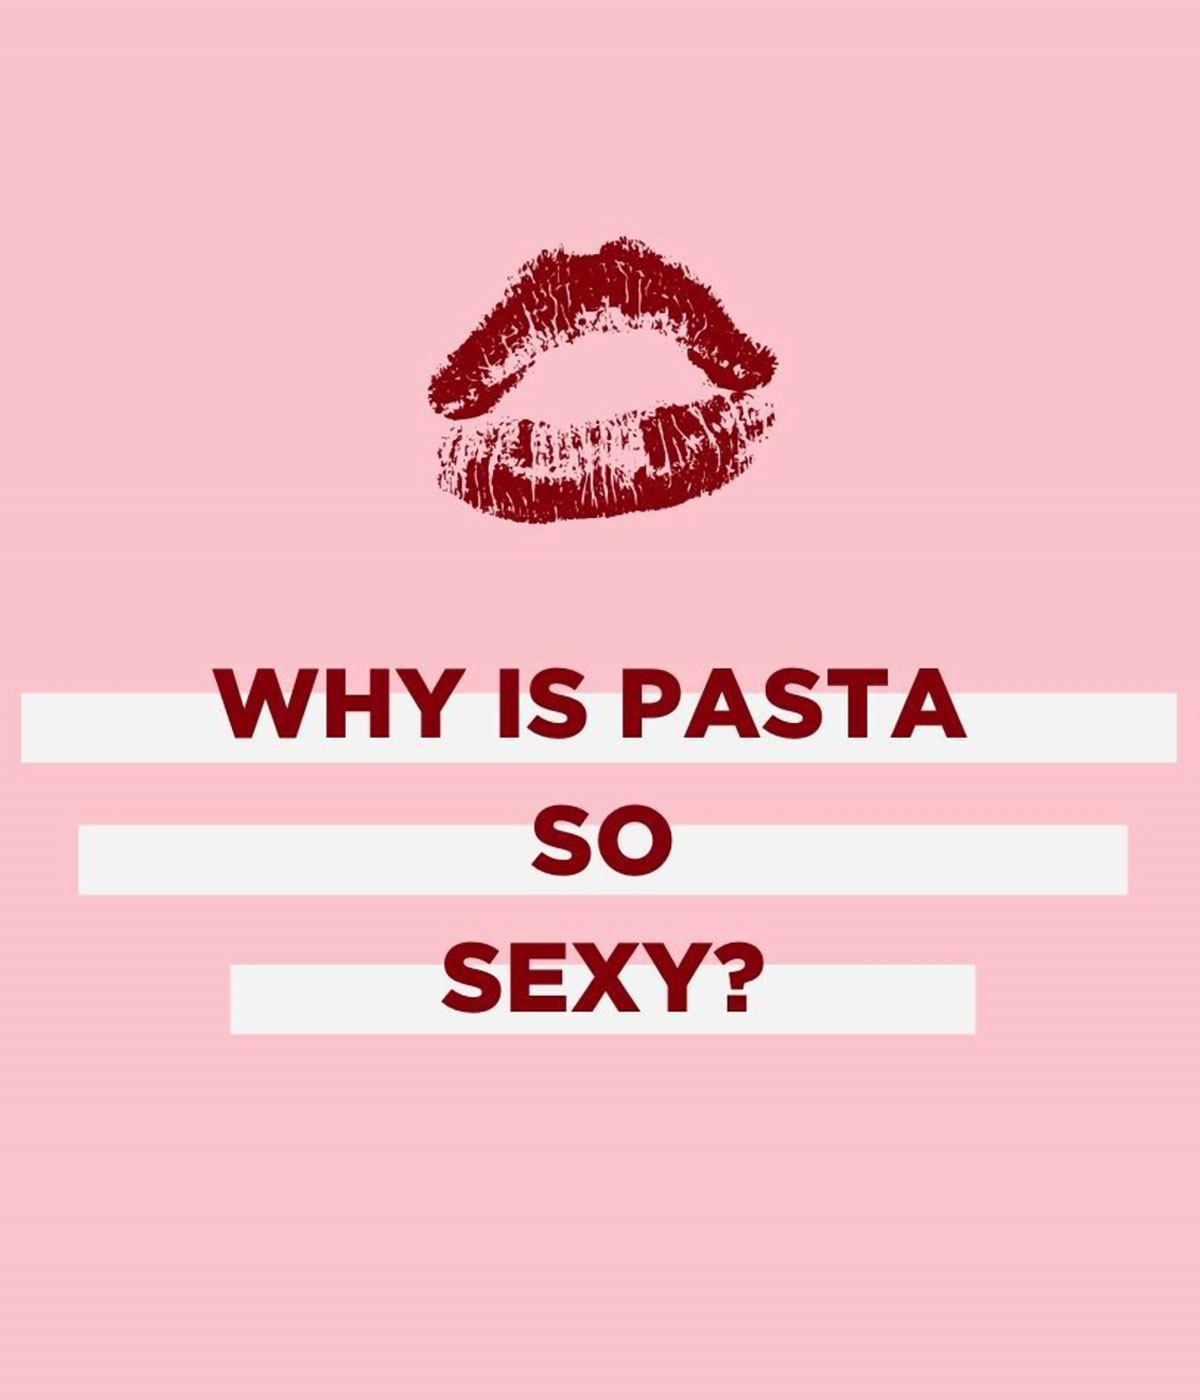 An illustration of a lipstick mark and the title 'Why is Pasta so Sexy?'